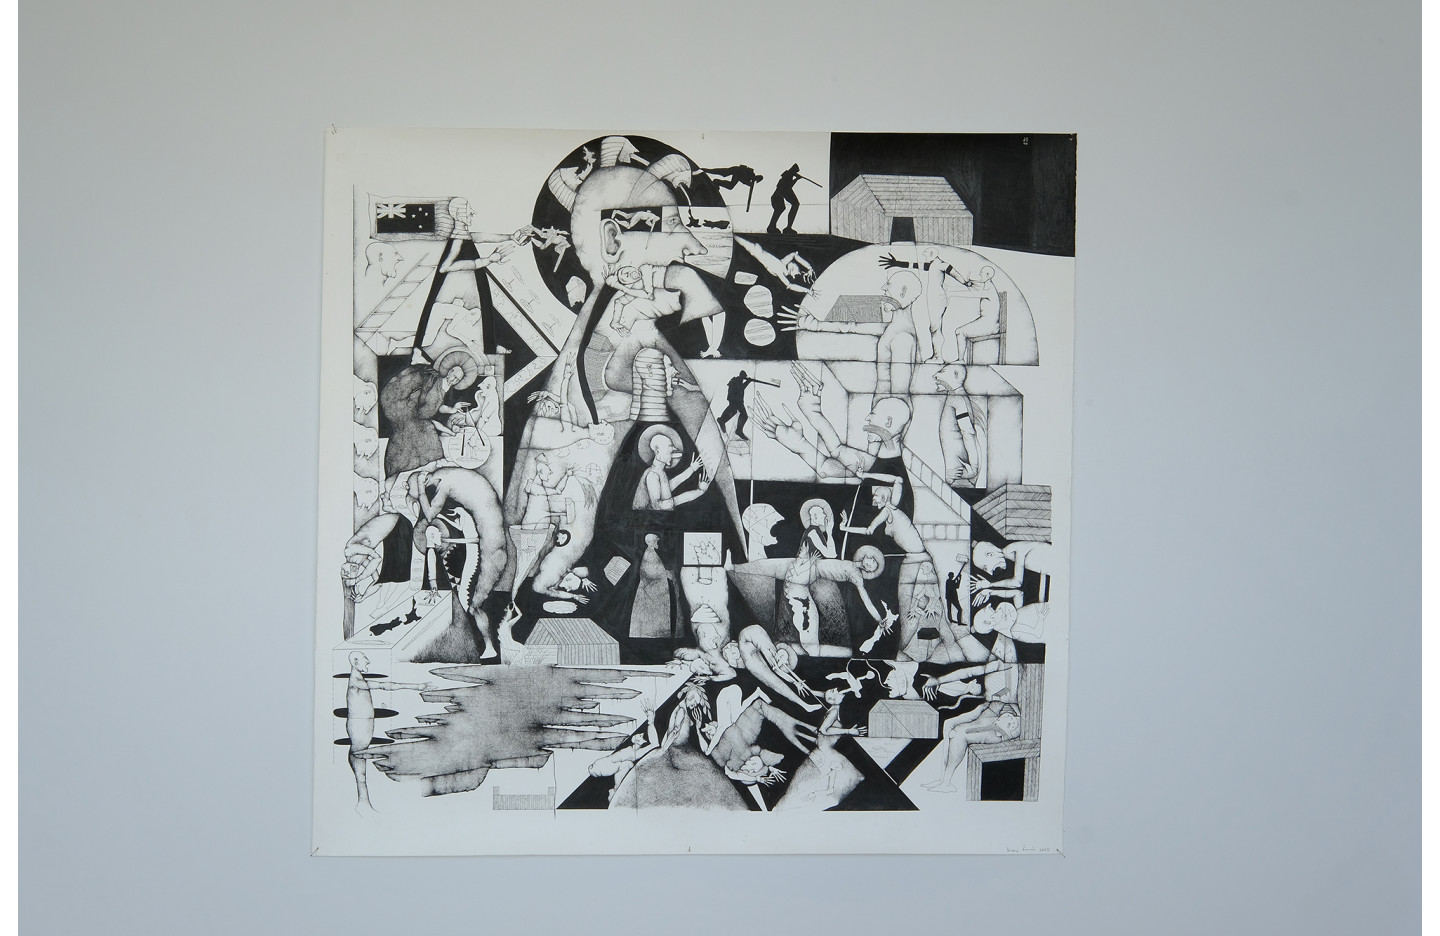 Diane Prince, A Legal Fabrication, 2008, Indian ink on paper, 1355 x 1415 mm